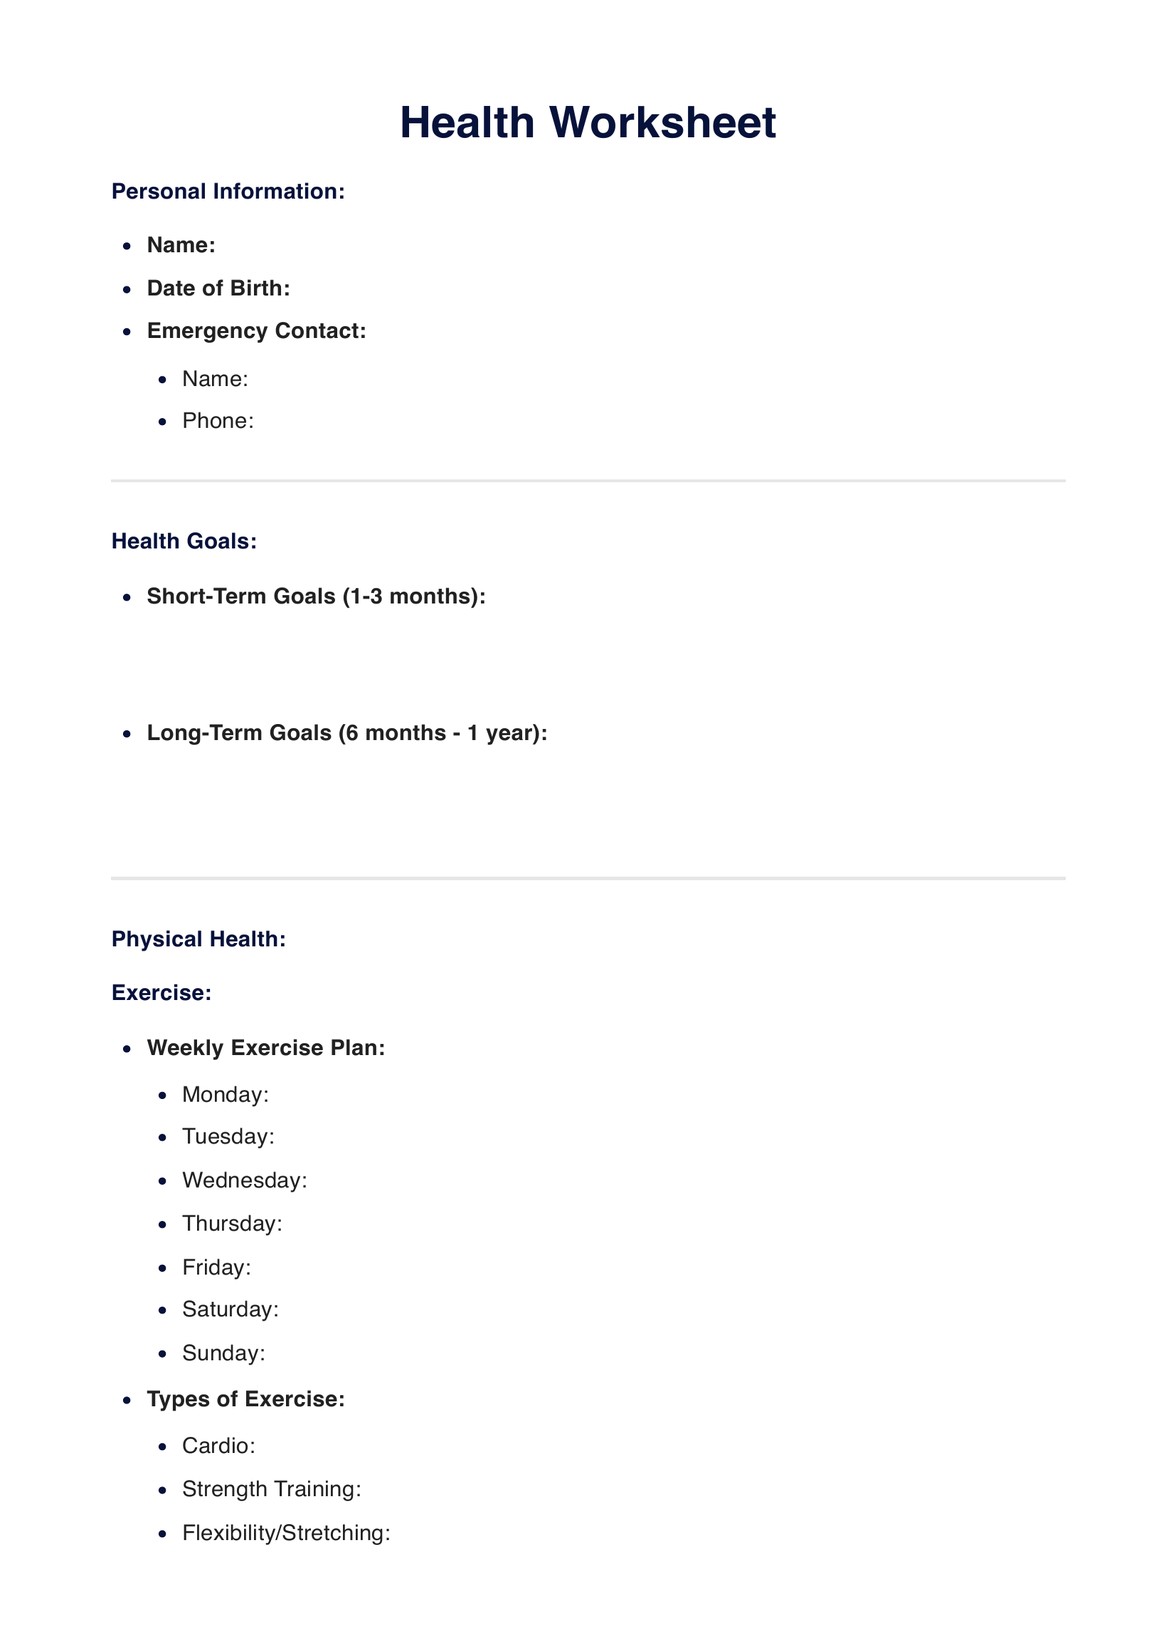 Health Worksheets Template PDF Example